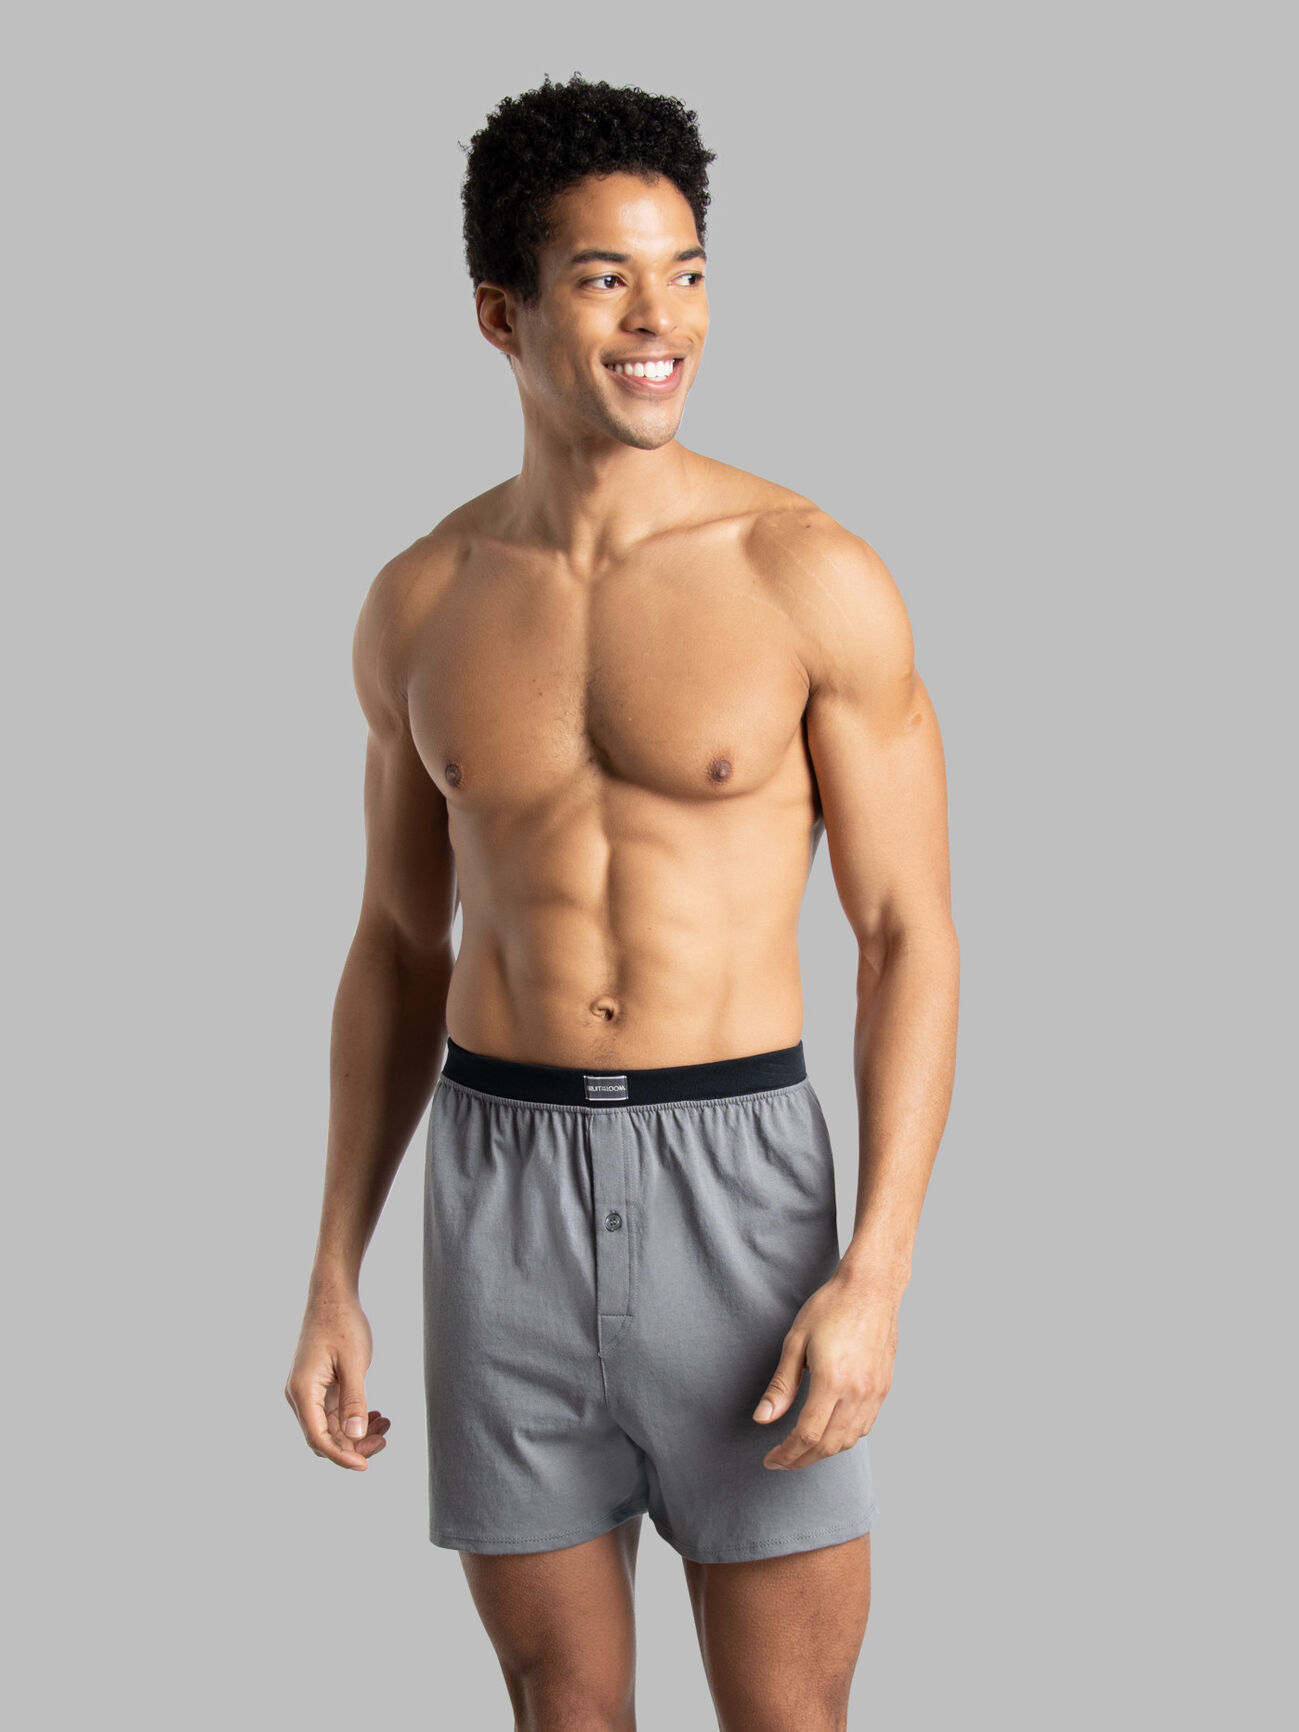 Men's Knit Boxers, Assorted 6 Pack Assorted